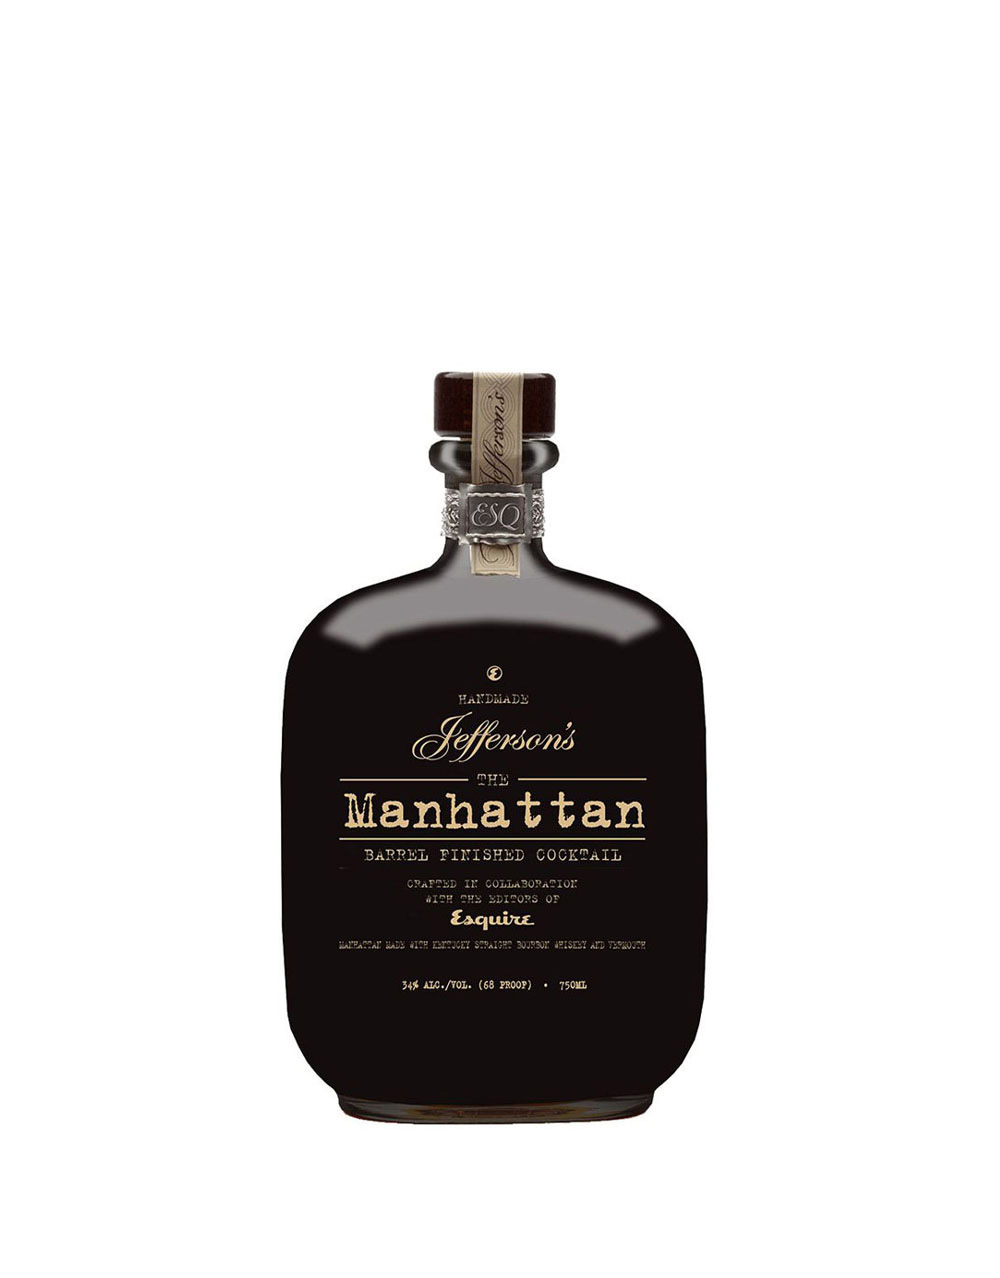 JEFFERSON'S THE MANHATTAN BARREL FINISHED COCKTAIL